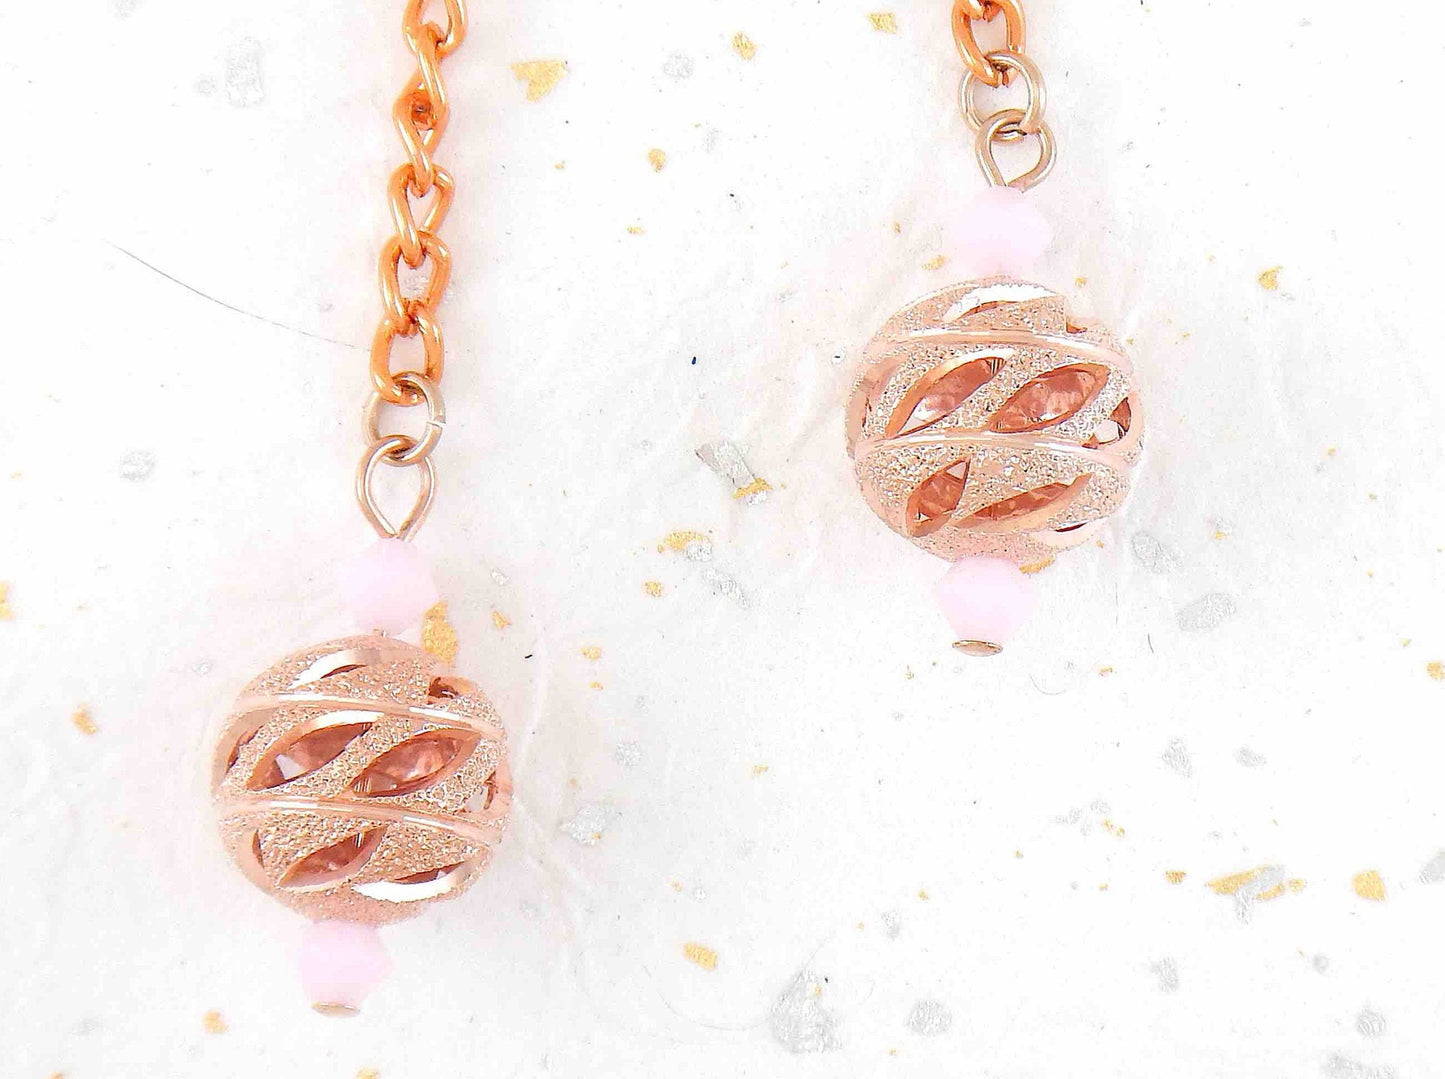 Long earrings with rose gold filigree balls and Swarovski crystals, rose-gold plated metal lever back hooks